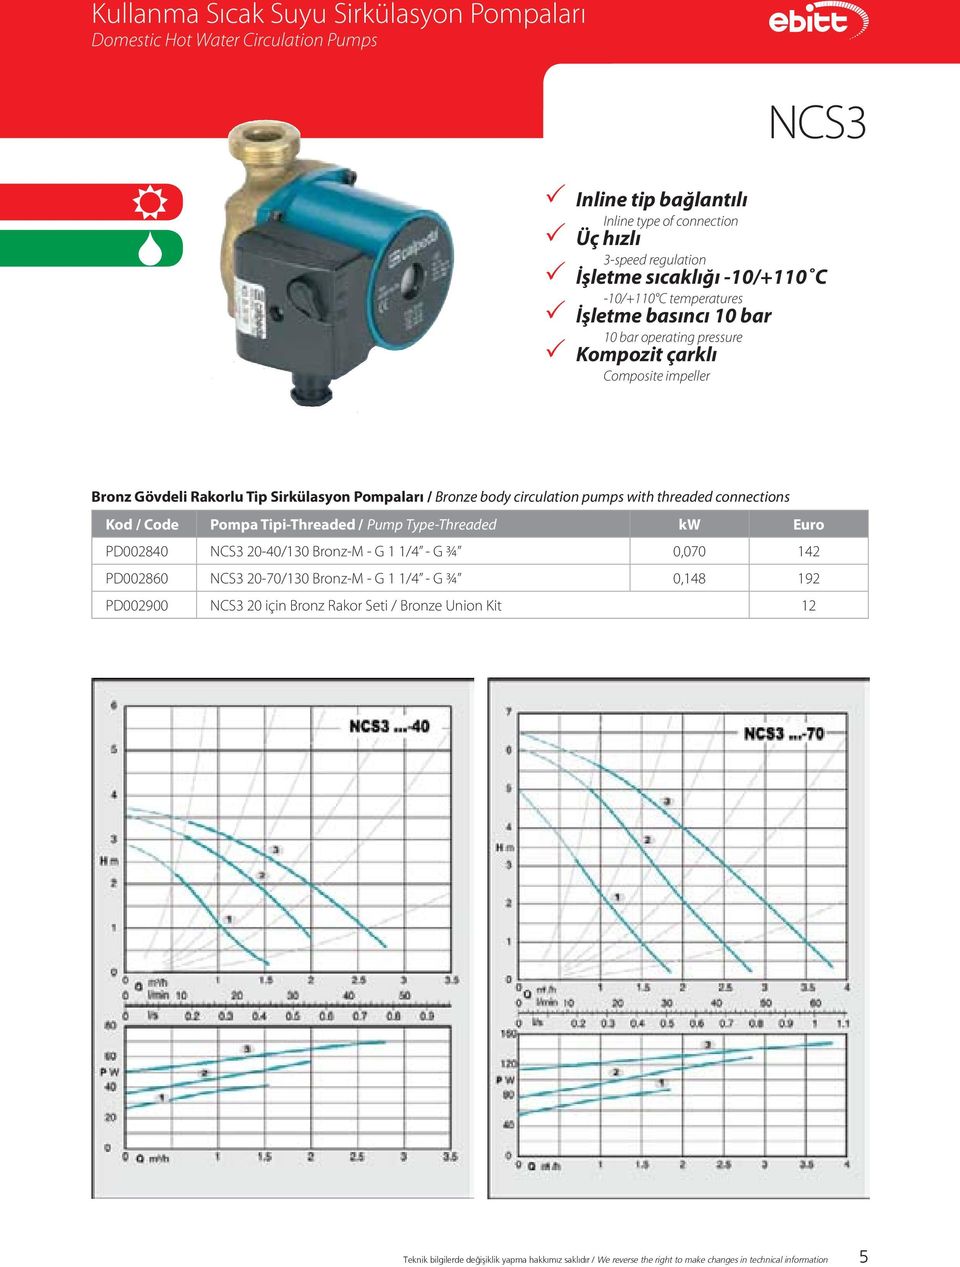 circulation pumps with threaded connections Kod / Code Pompa Tipi-Threaded / Pump Type-Threaded kw Euro PD002840 NCS3 20-40/130 Bronz-M - G 1 1/4 - G ¾ 0,070 142 PD002860 NCS3 20-70/130